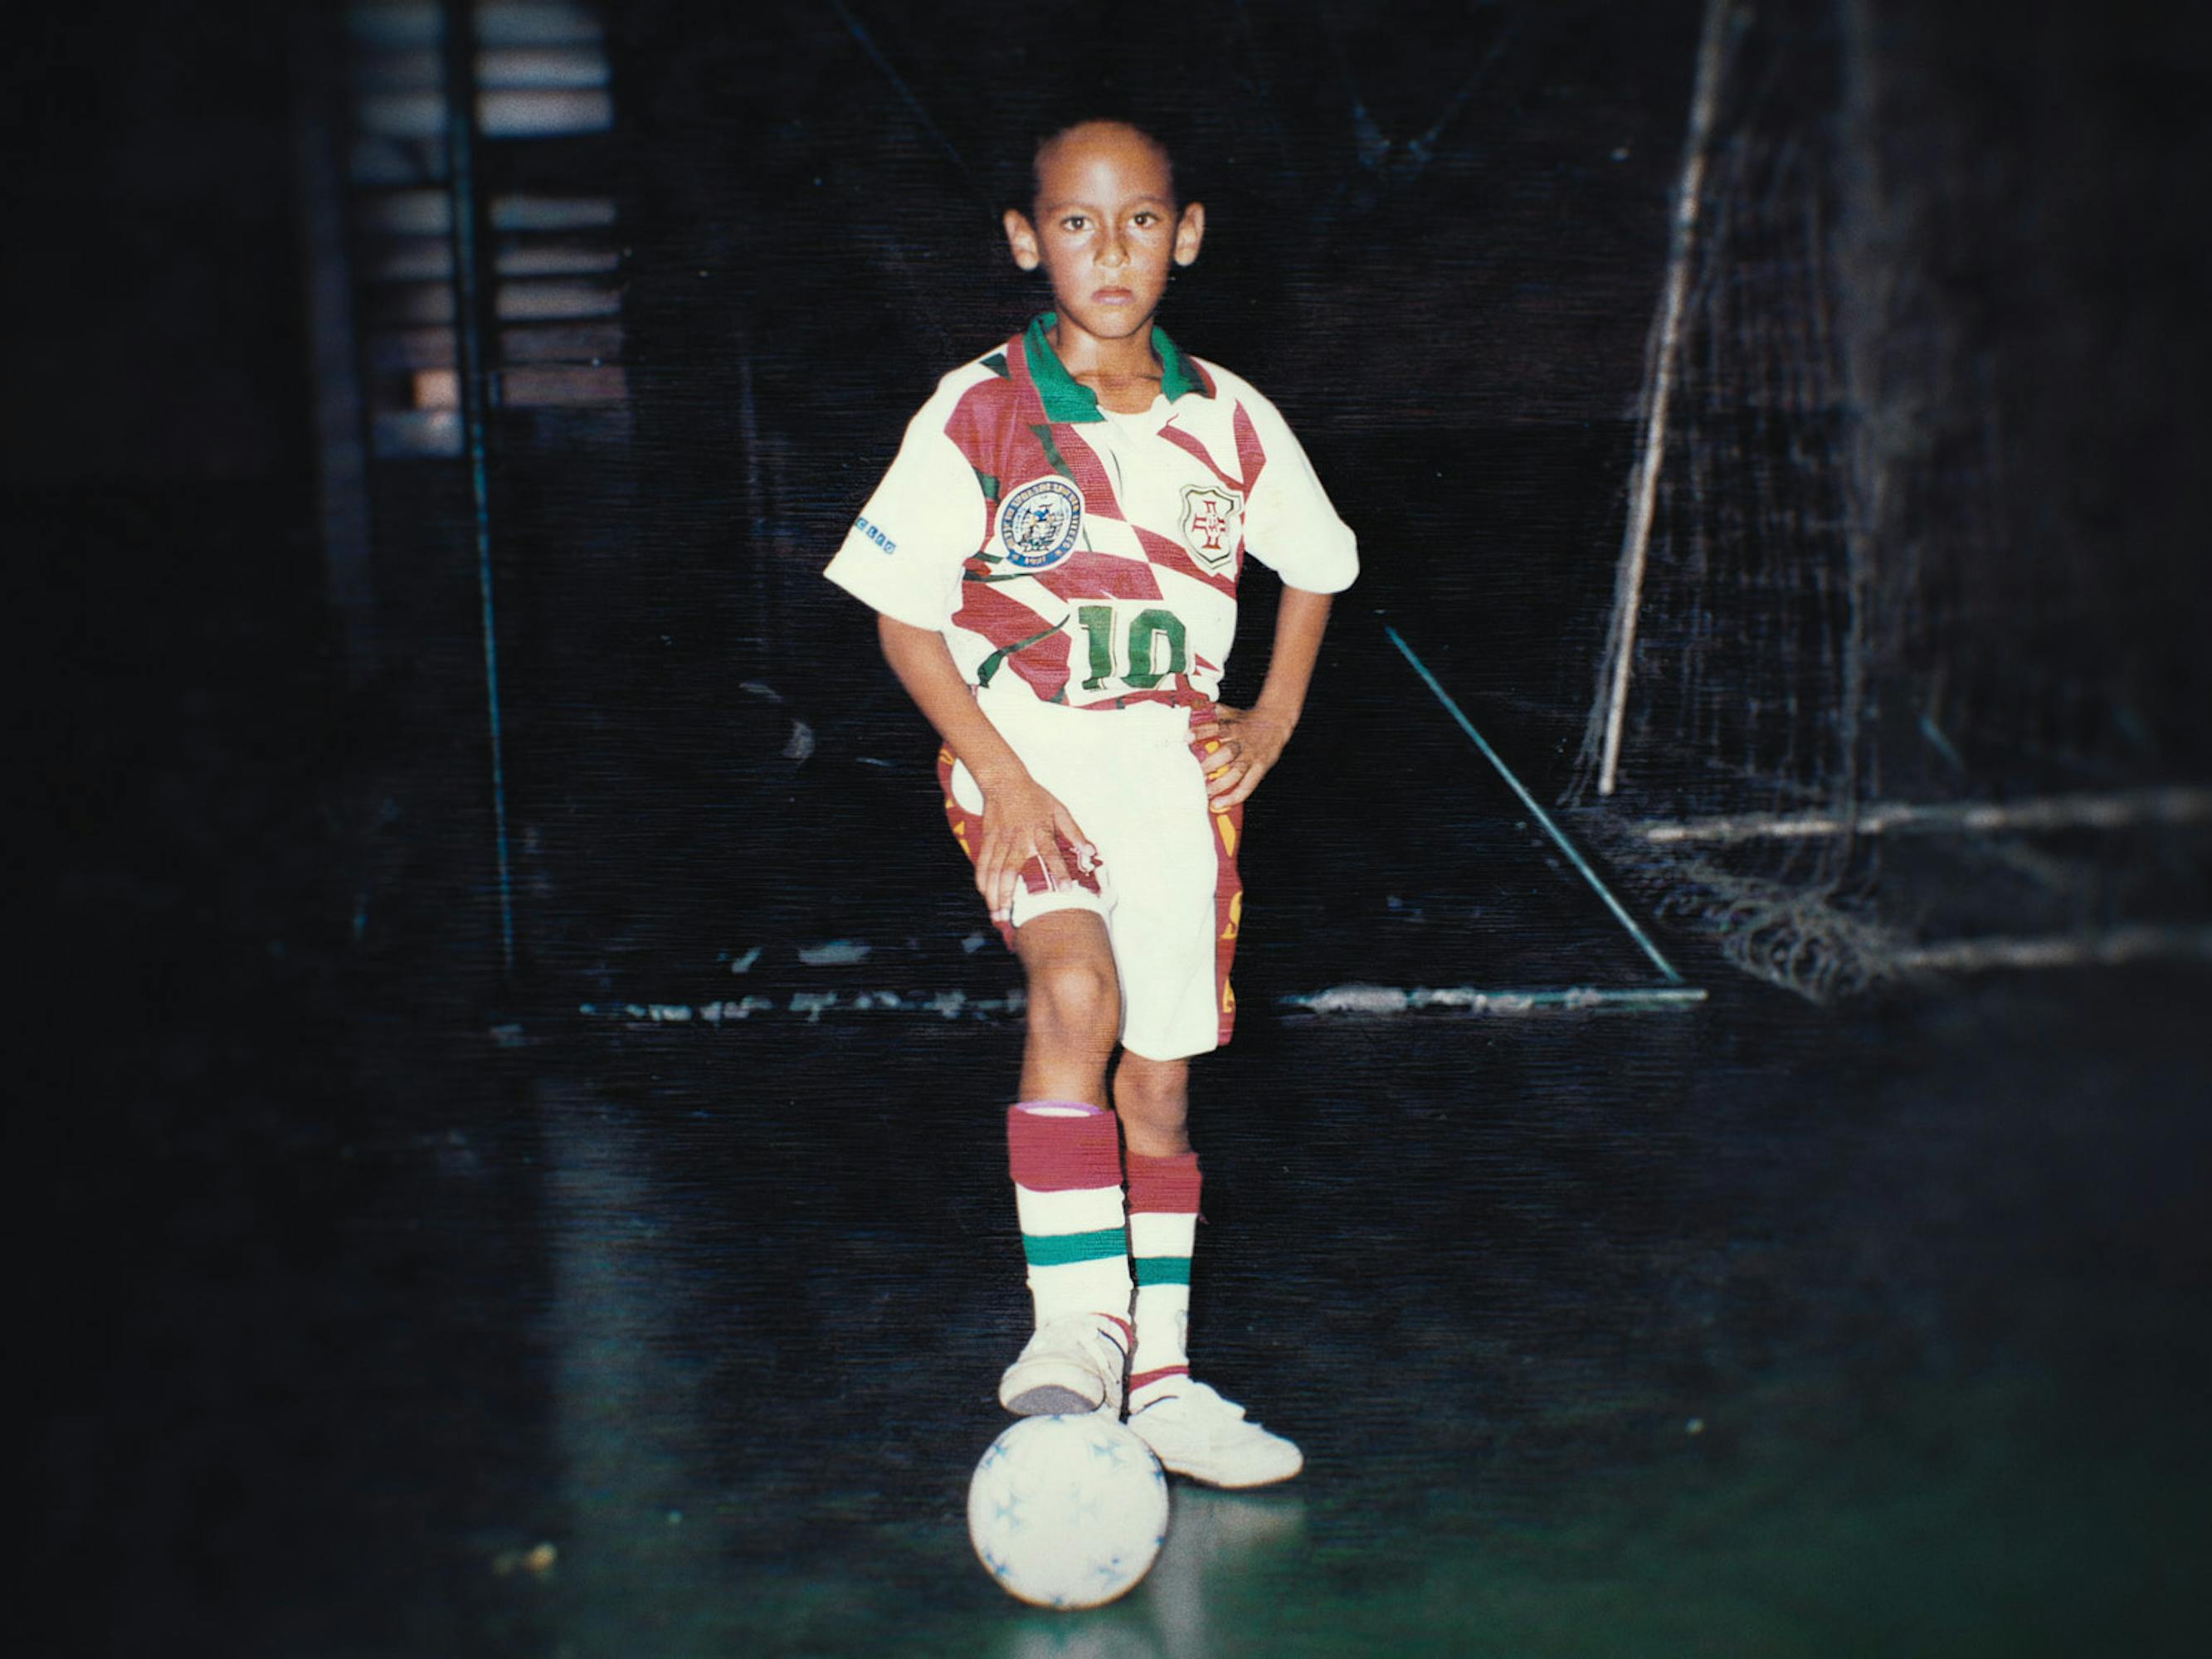 Baby Neymar wears a white soccer outfit with green and red trimming.